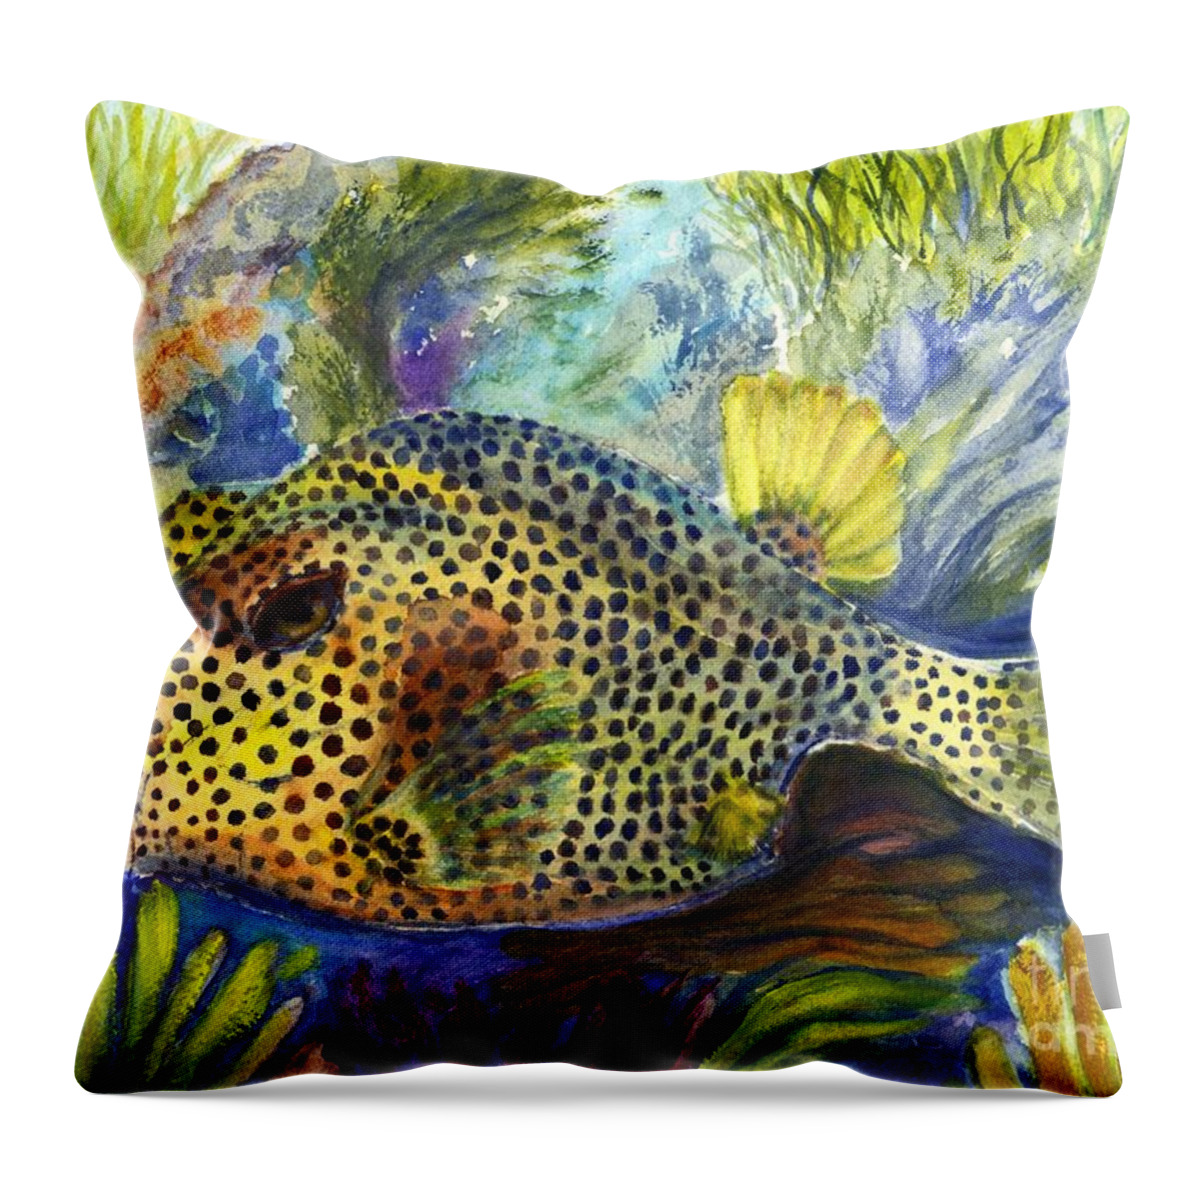 Tropical Fish Throw Pillow featuring the painting Spotted Trunkfish by Carol Wisniewski